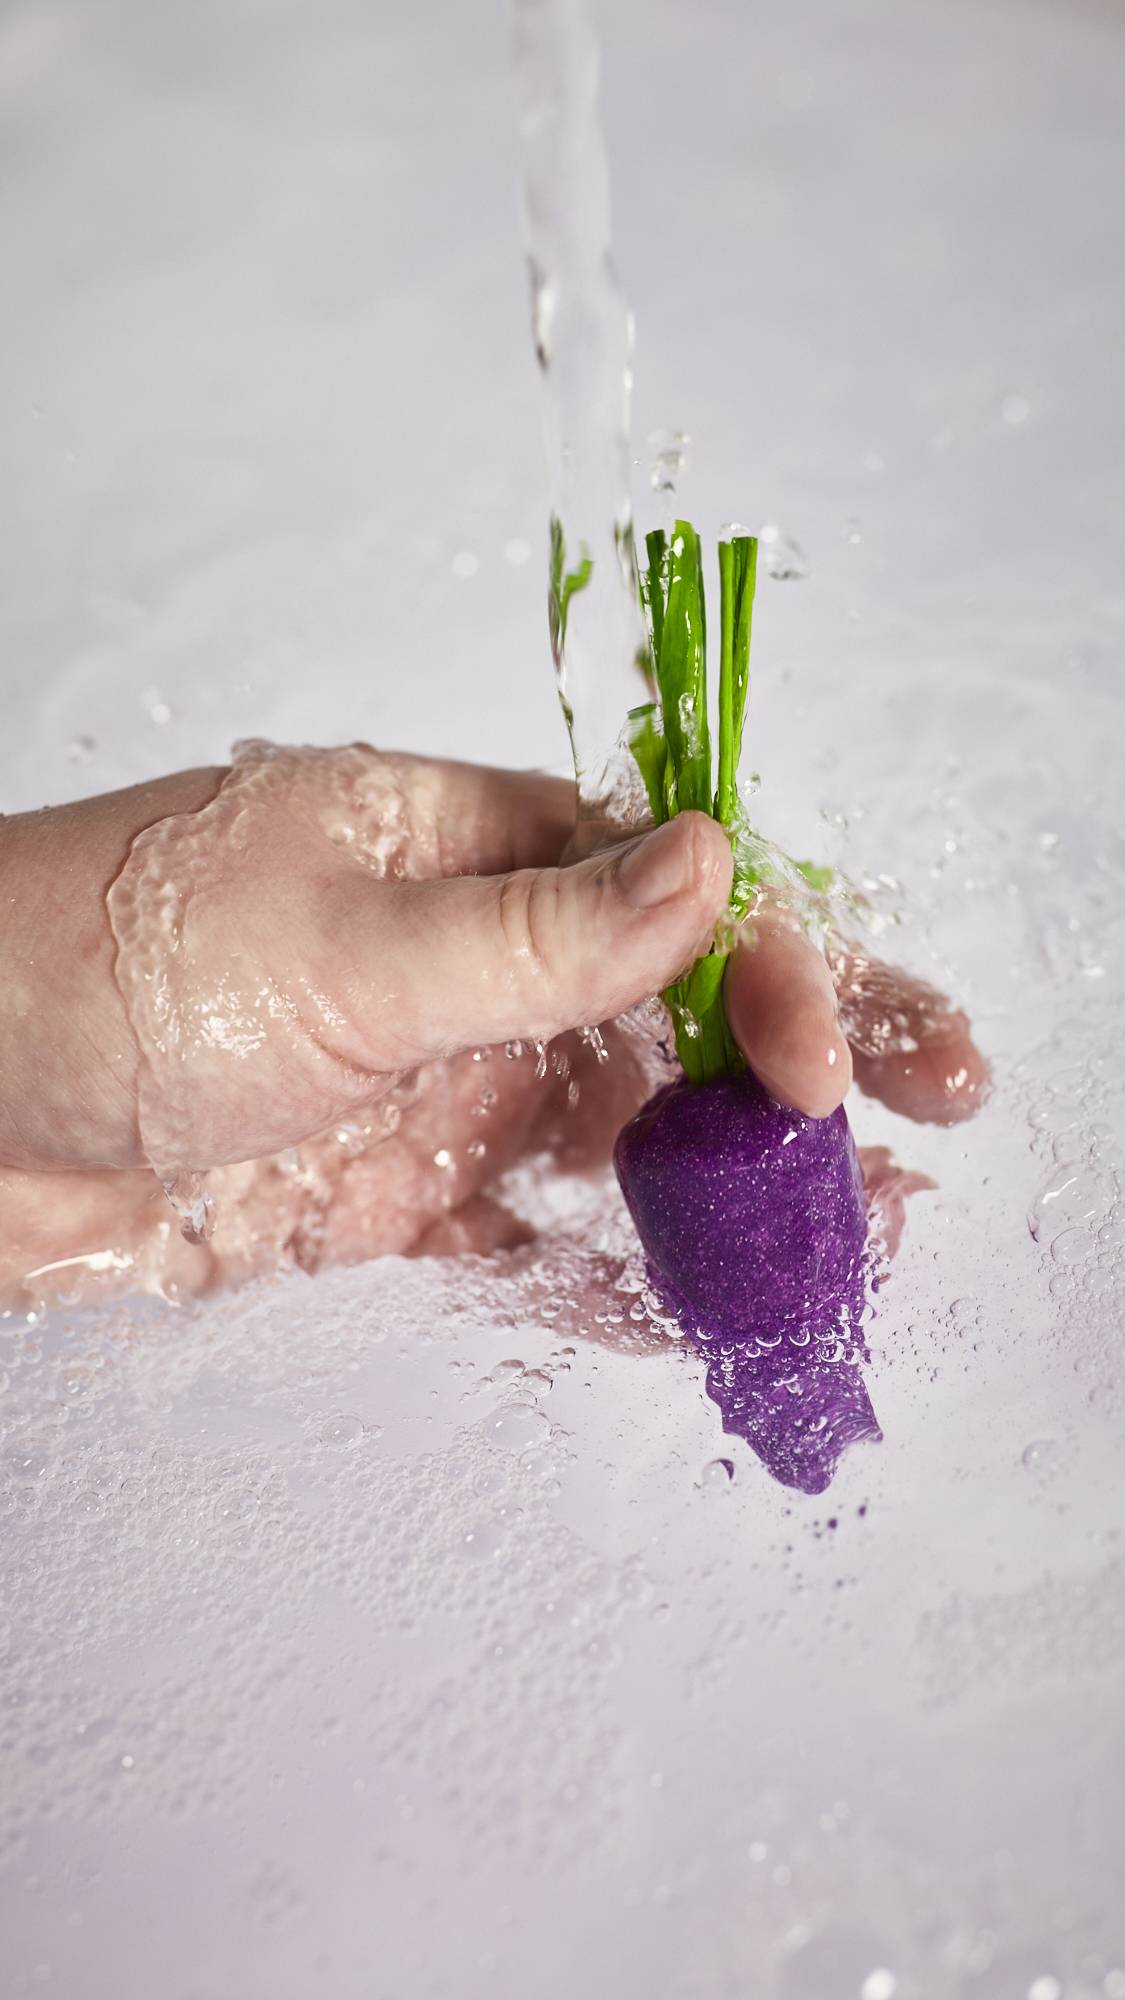 A close-up image of the model's hand holding the purple carrot bubble bar by the green leaves under running tap water into the bath below. 